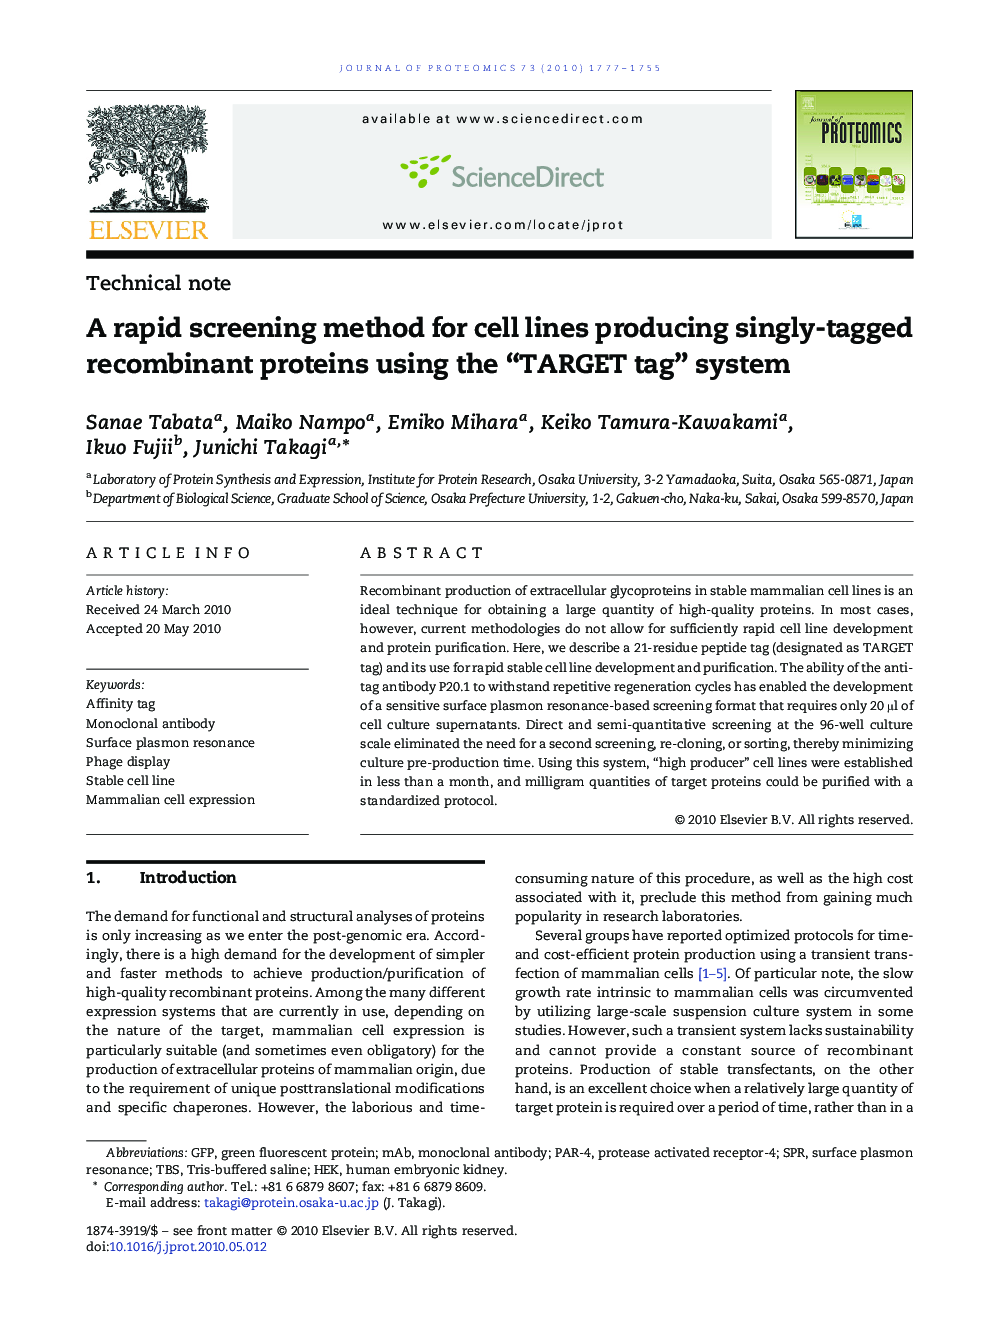 A rapid screening method for cell lines producing singly-tagged recombinant proteins using the “TARGET tag” system